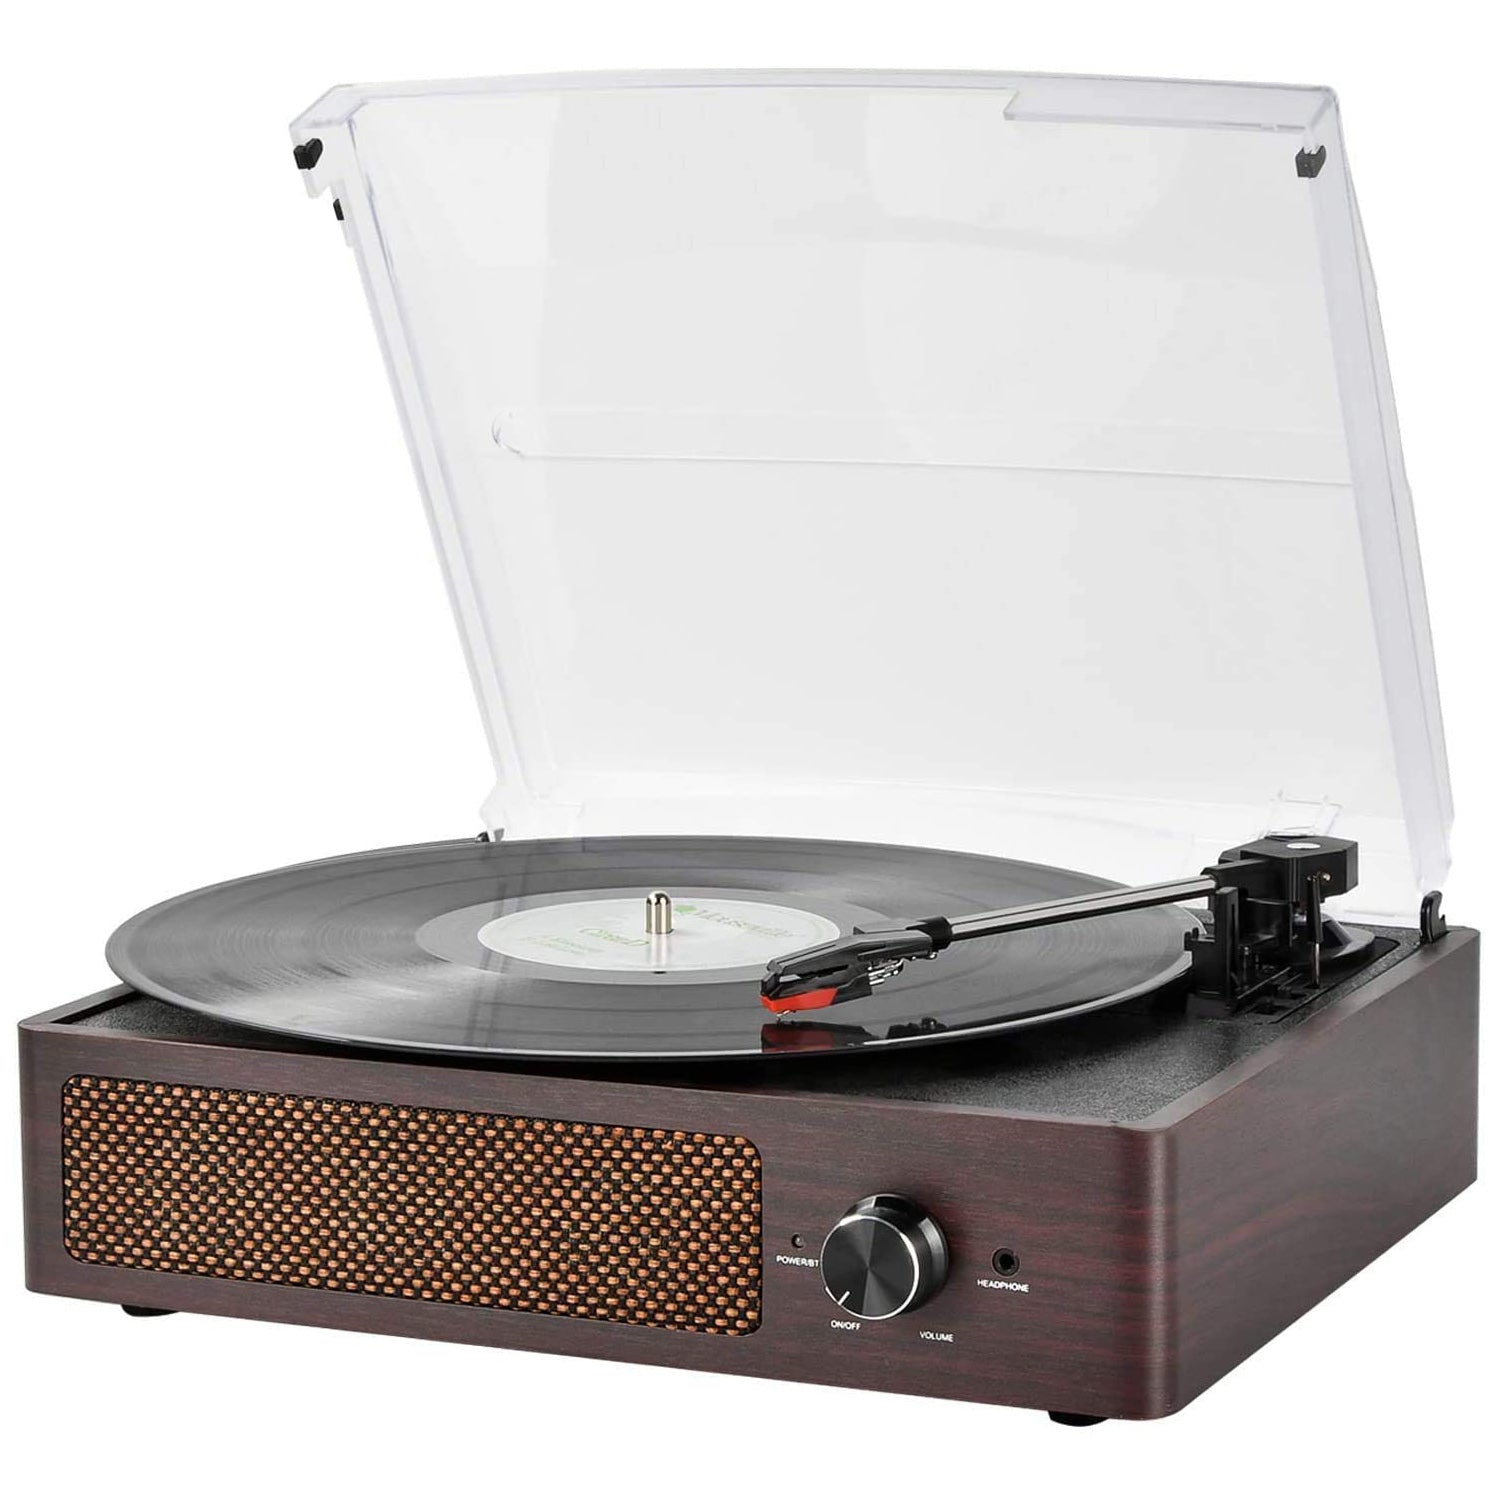 DIGITNOW Bluetooth Record Player Turntable with Stereo Speaker